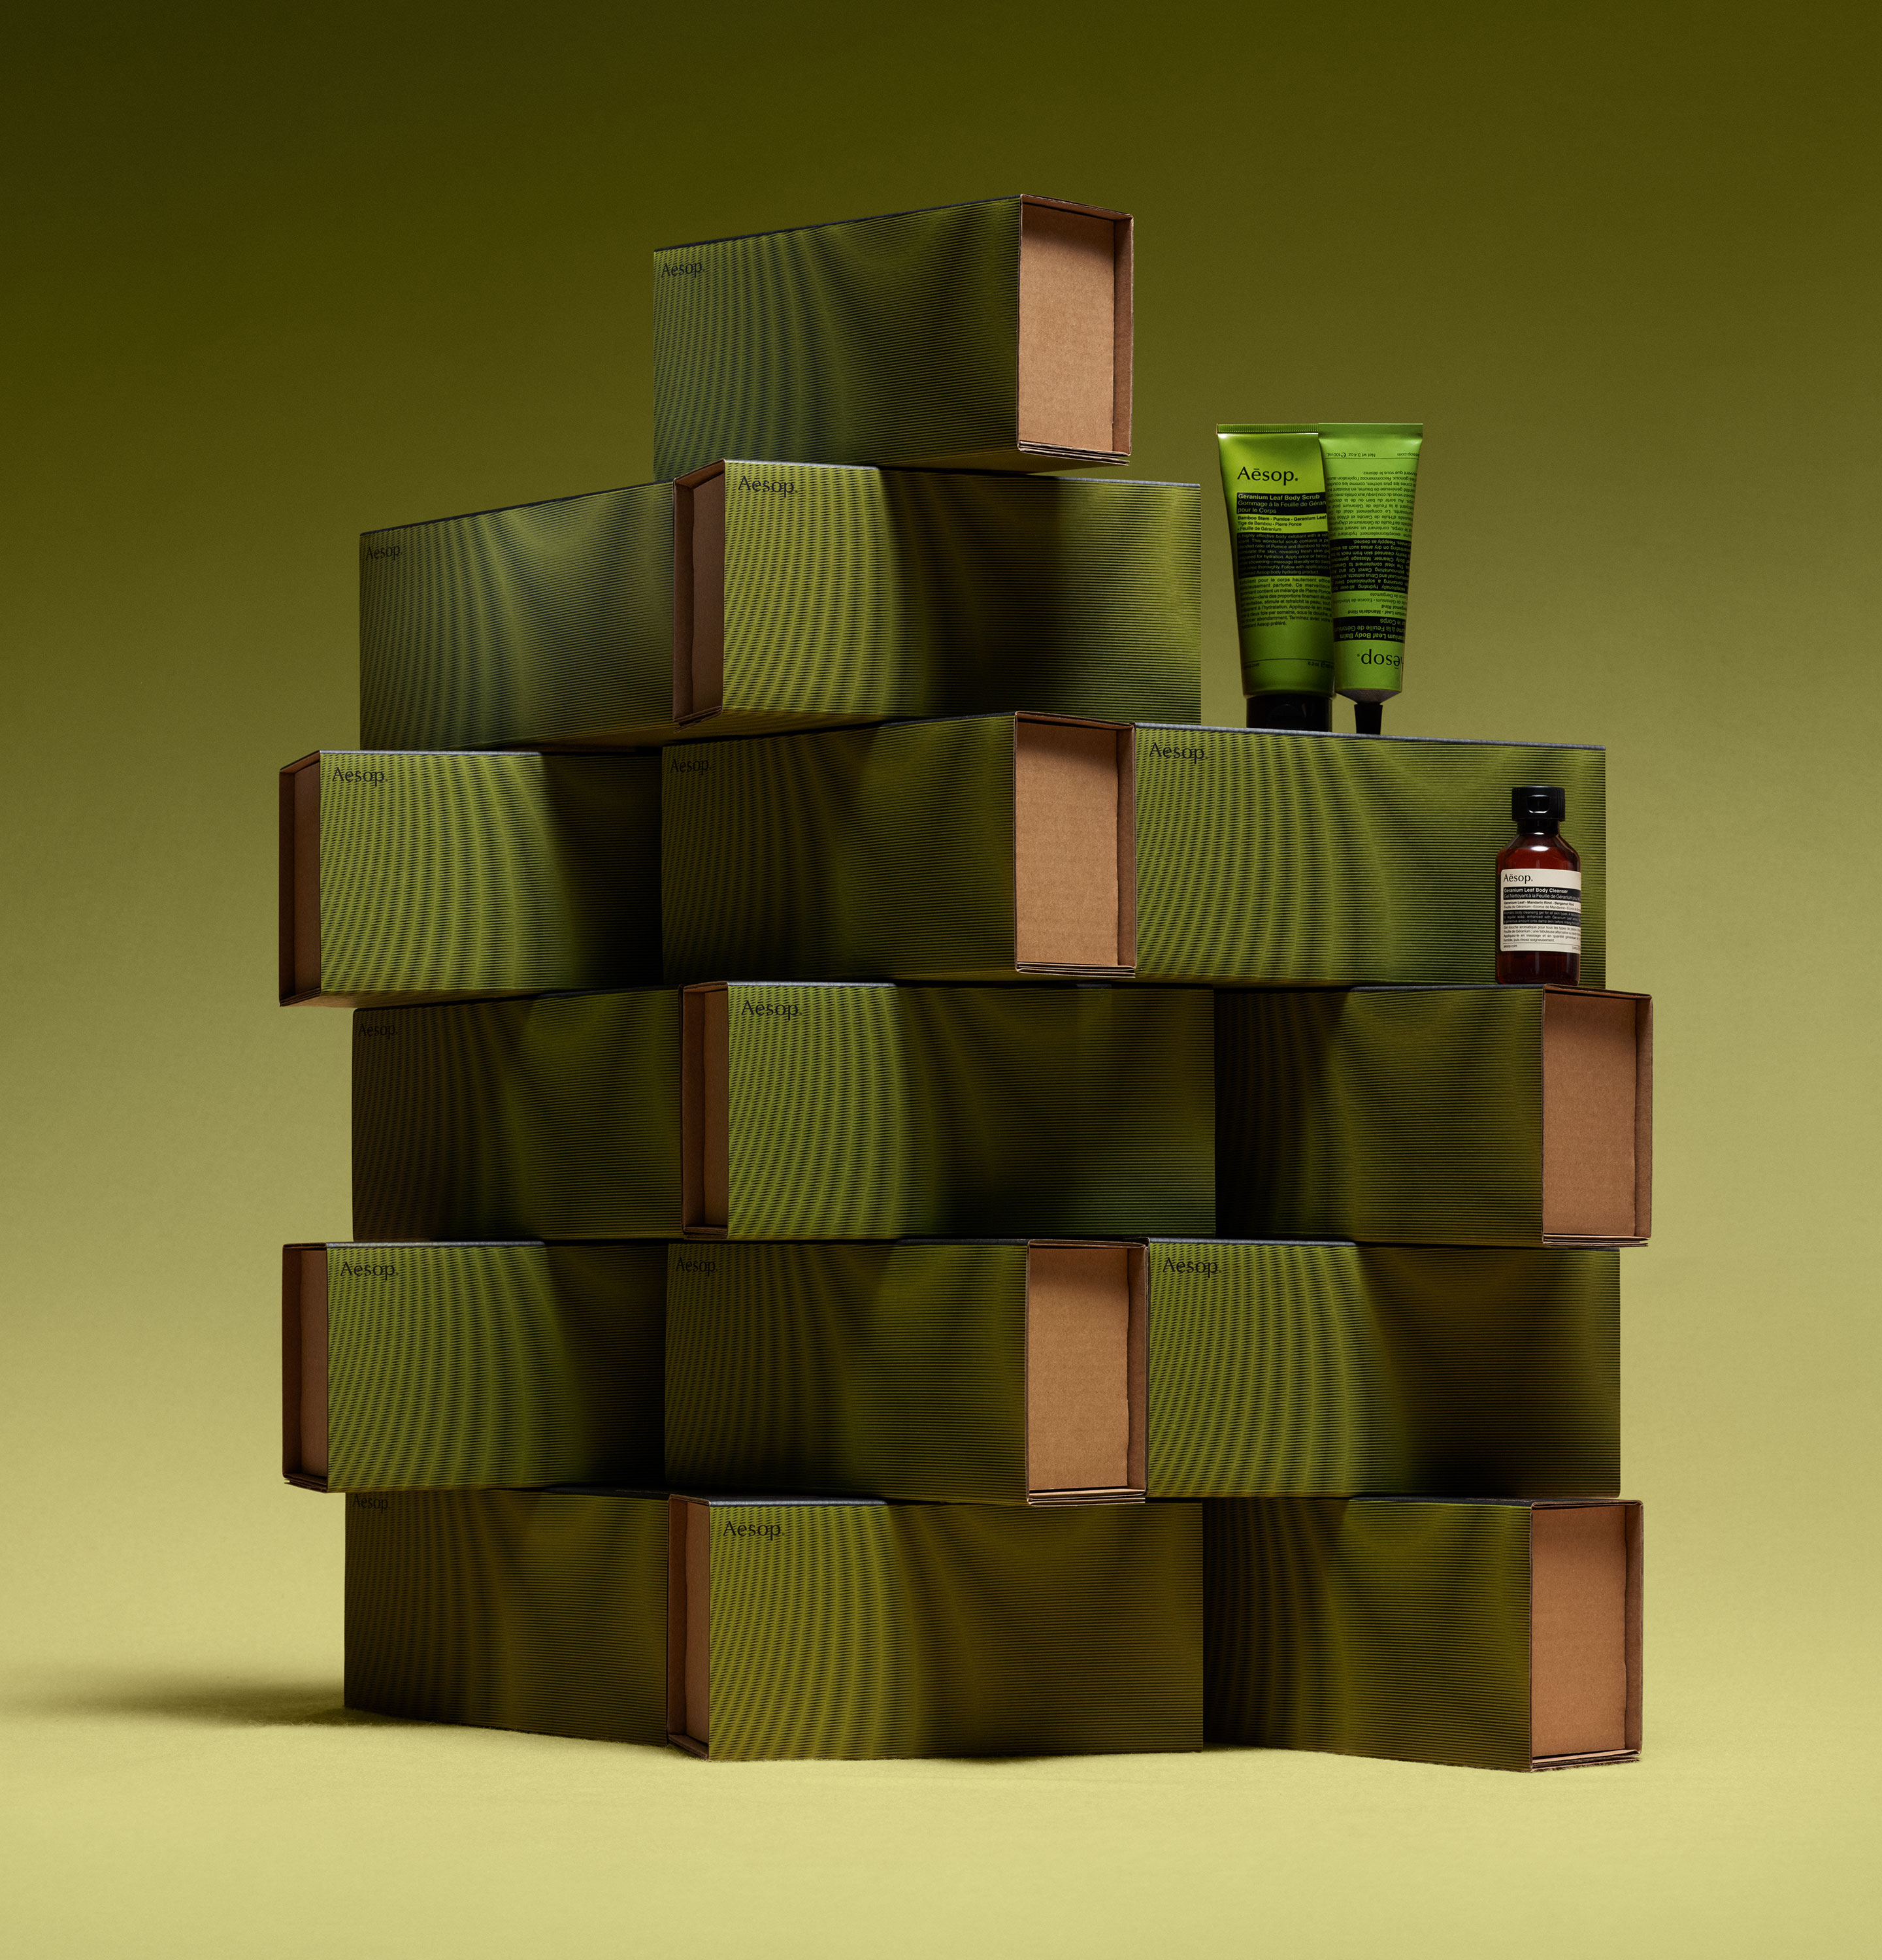 Aesop products placed on a stacked green cardboard boxes.